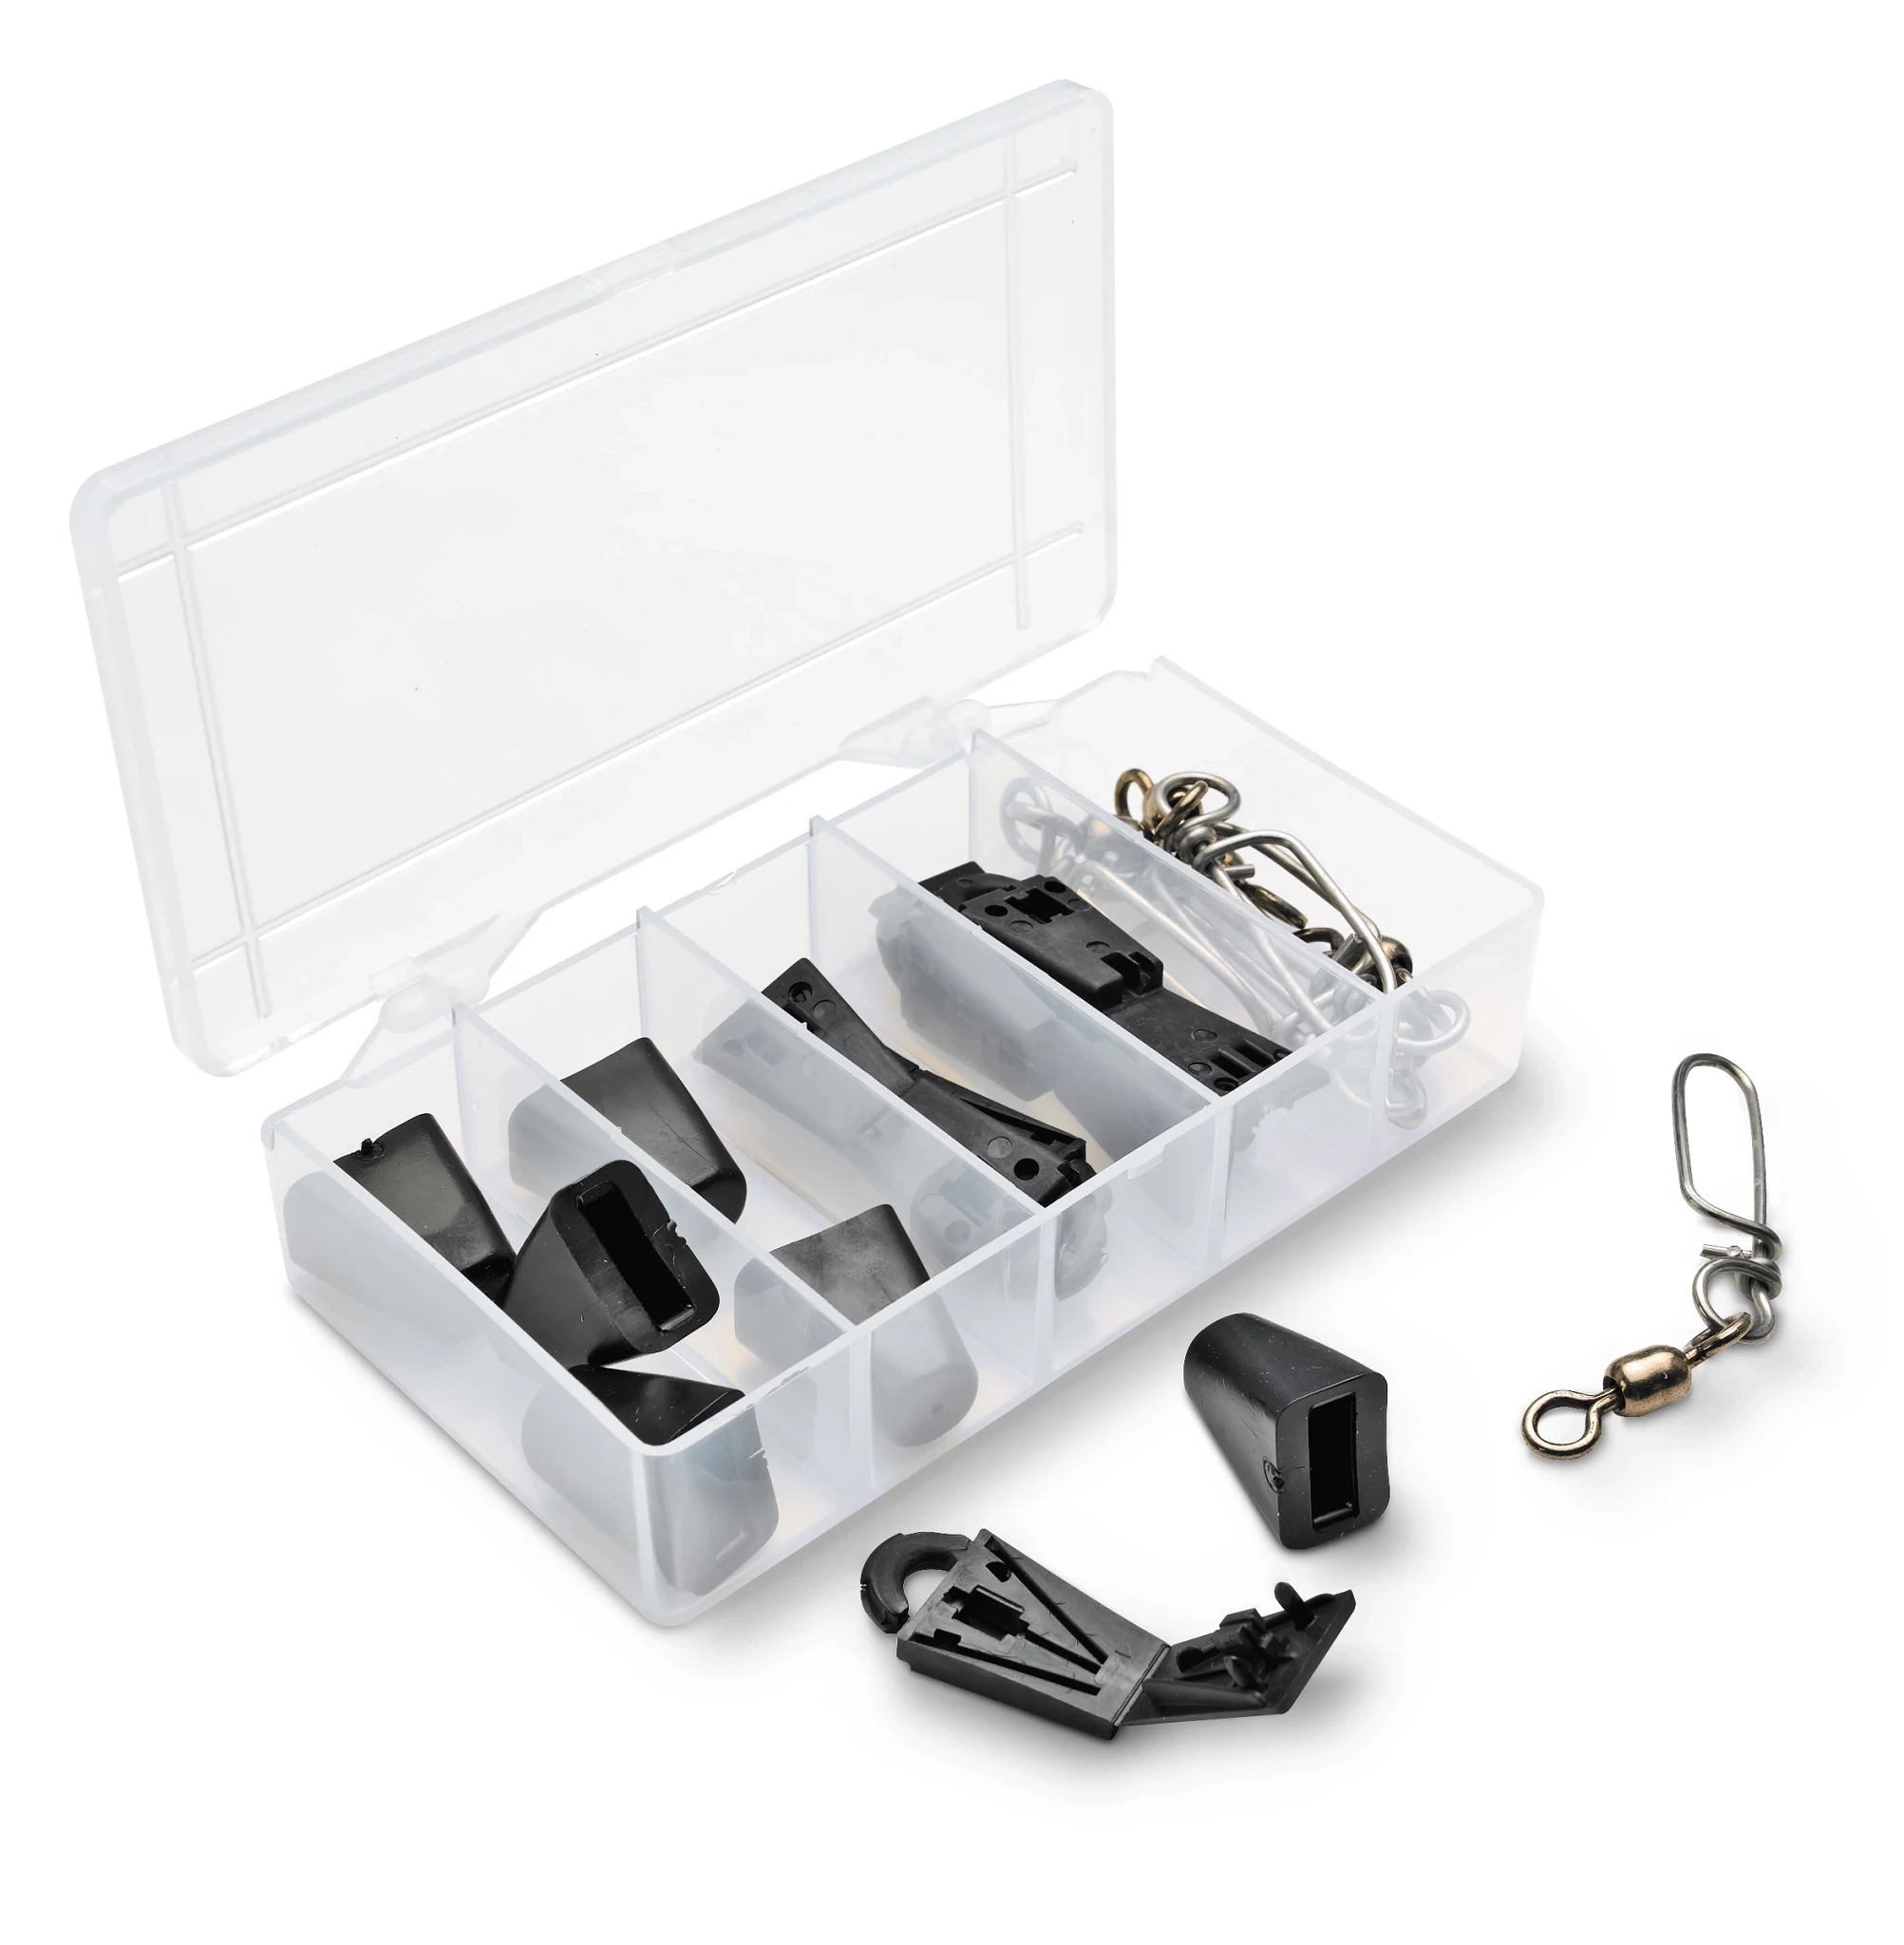 Clear tackle box with cushion cartridges, Cannon terminators, and swivels